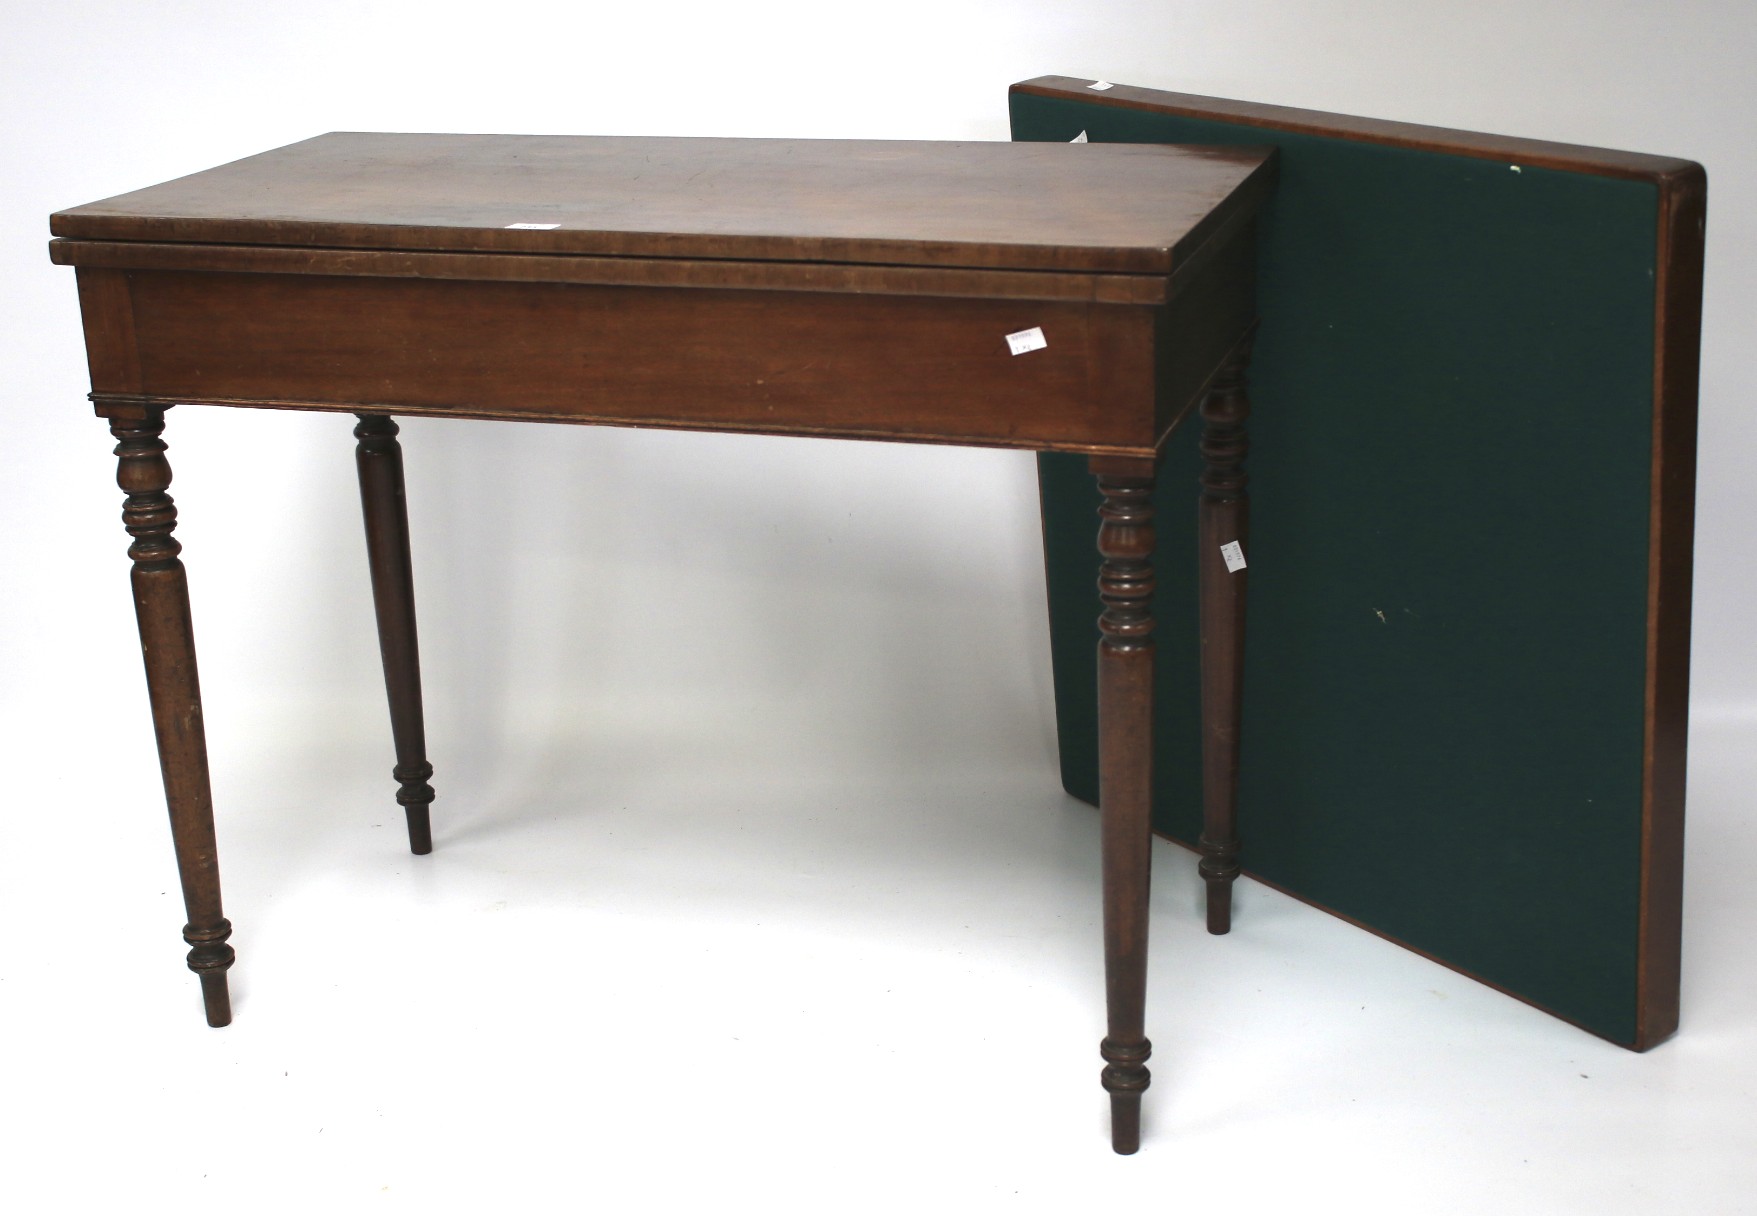 A 20th century mahogany games table and a card table.